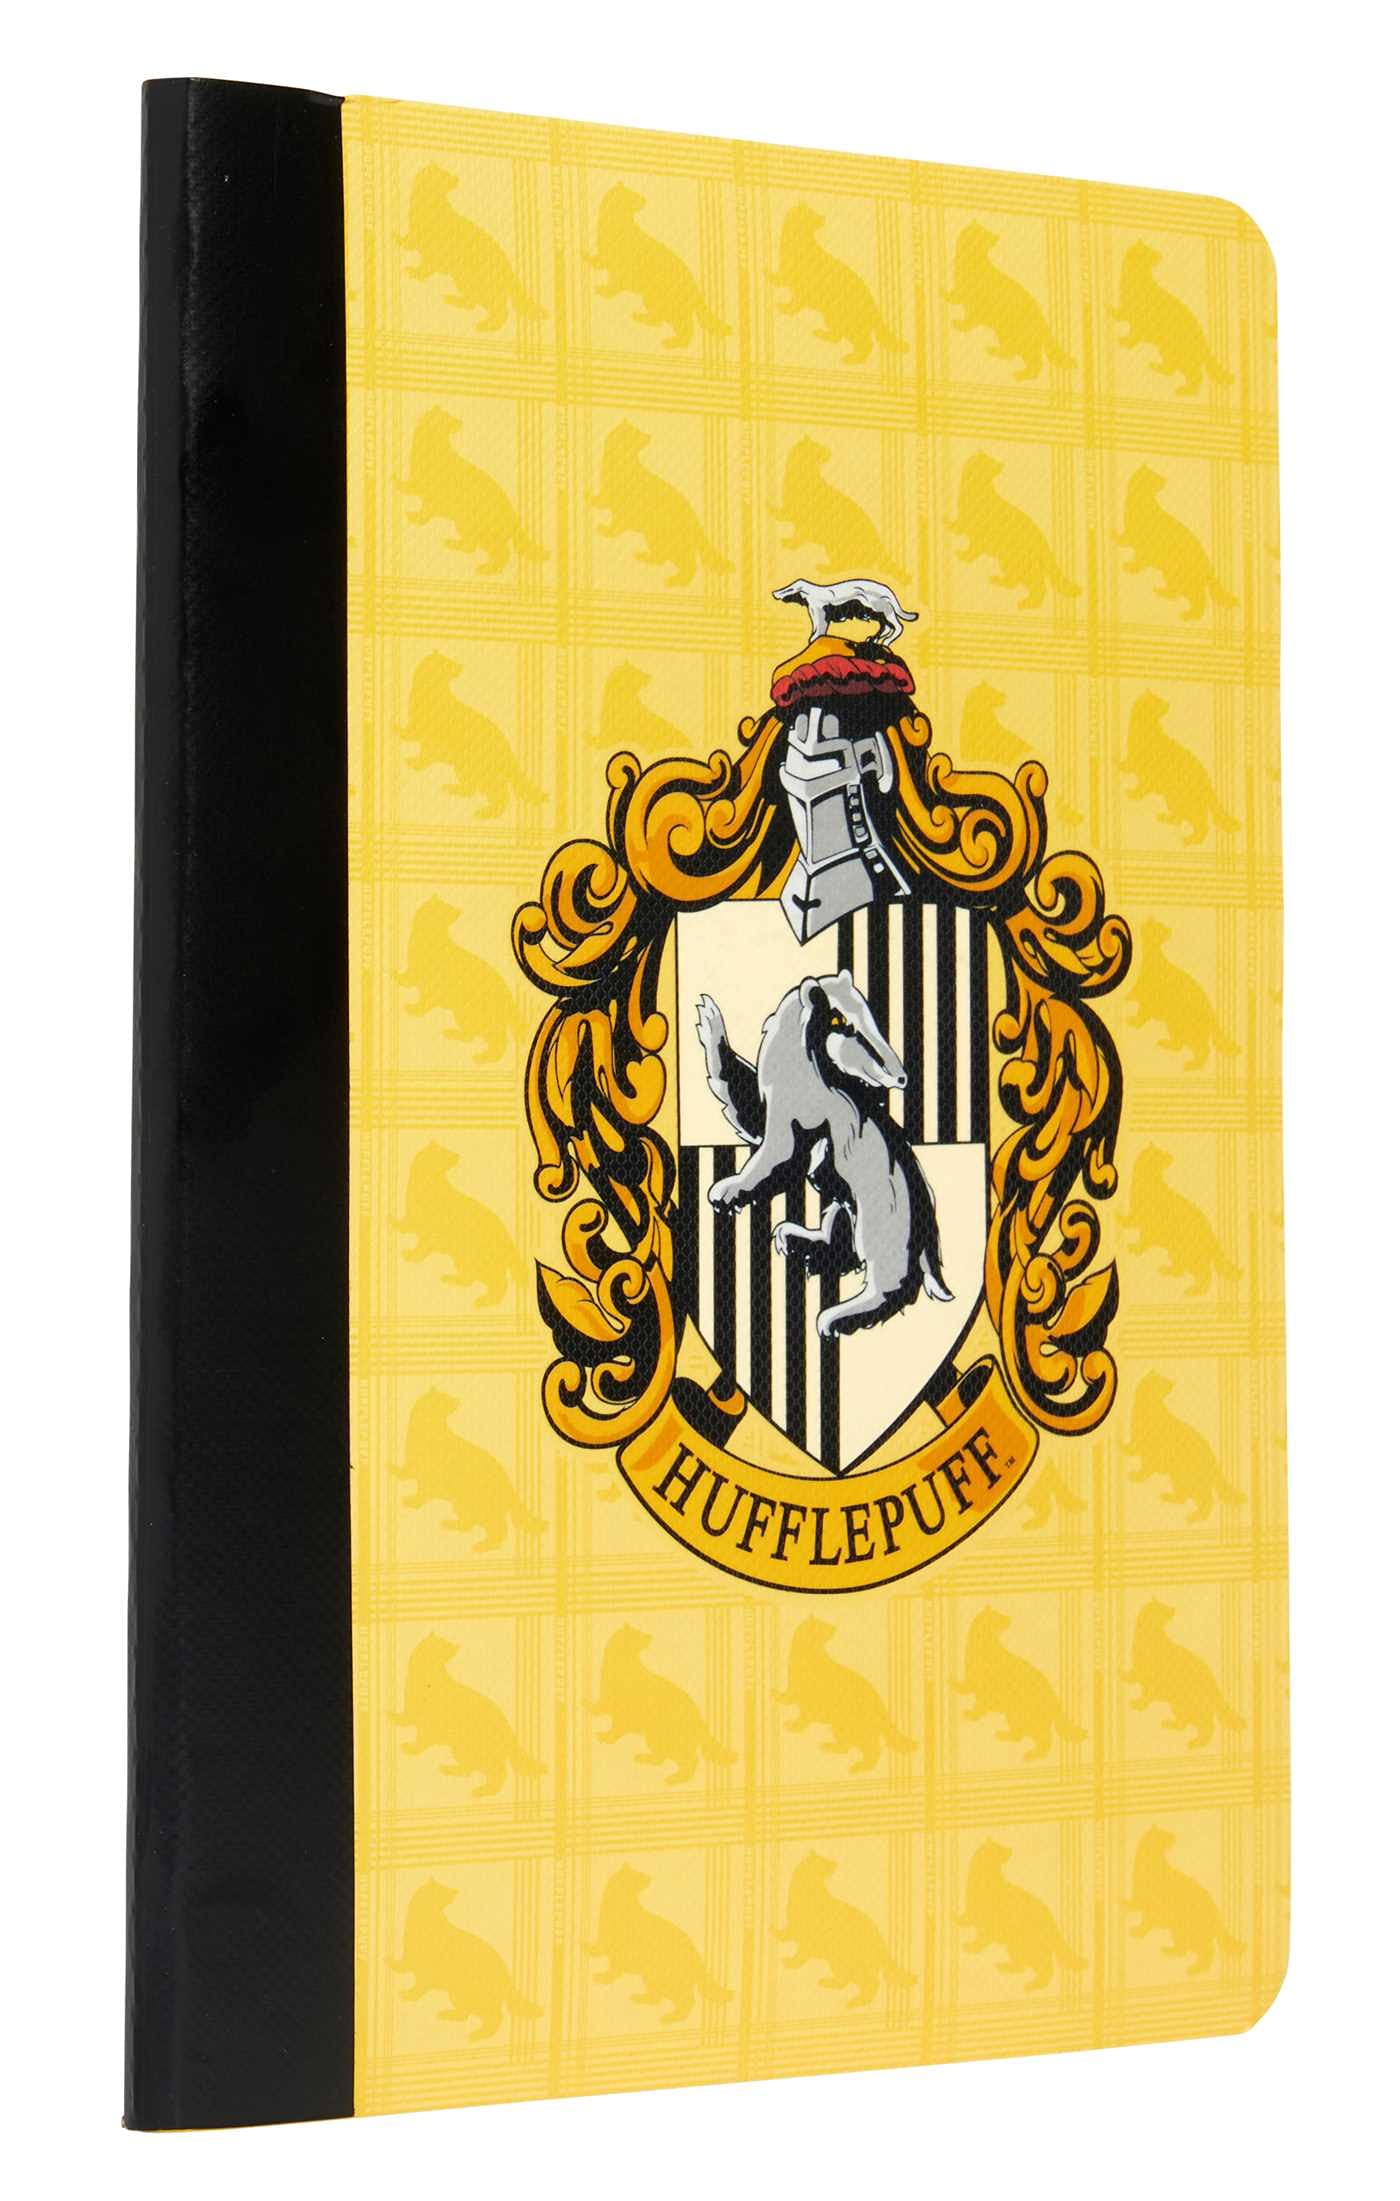 Carnet - Harry Potter: Hufflepuff Composition Notebook | Insight Editions